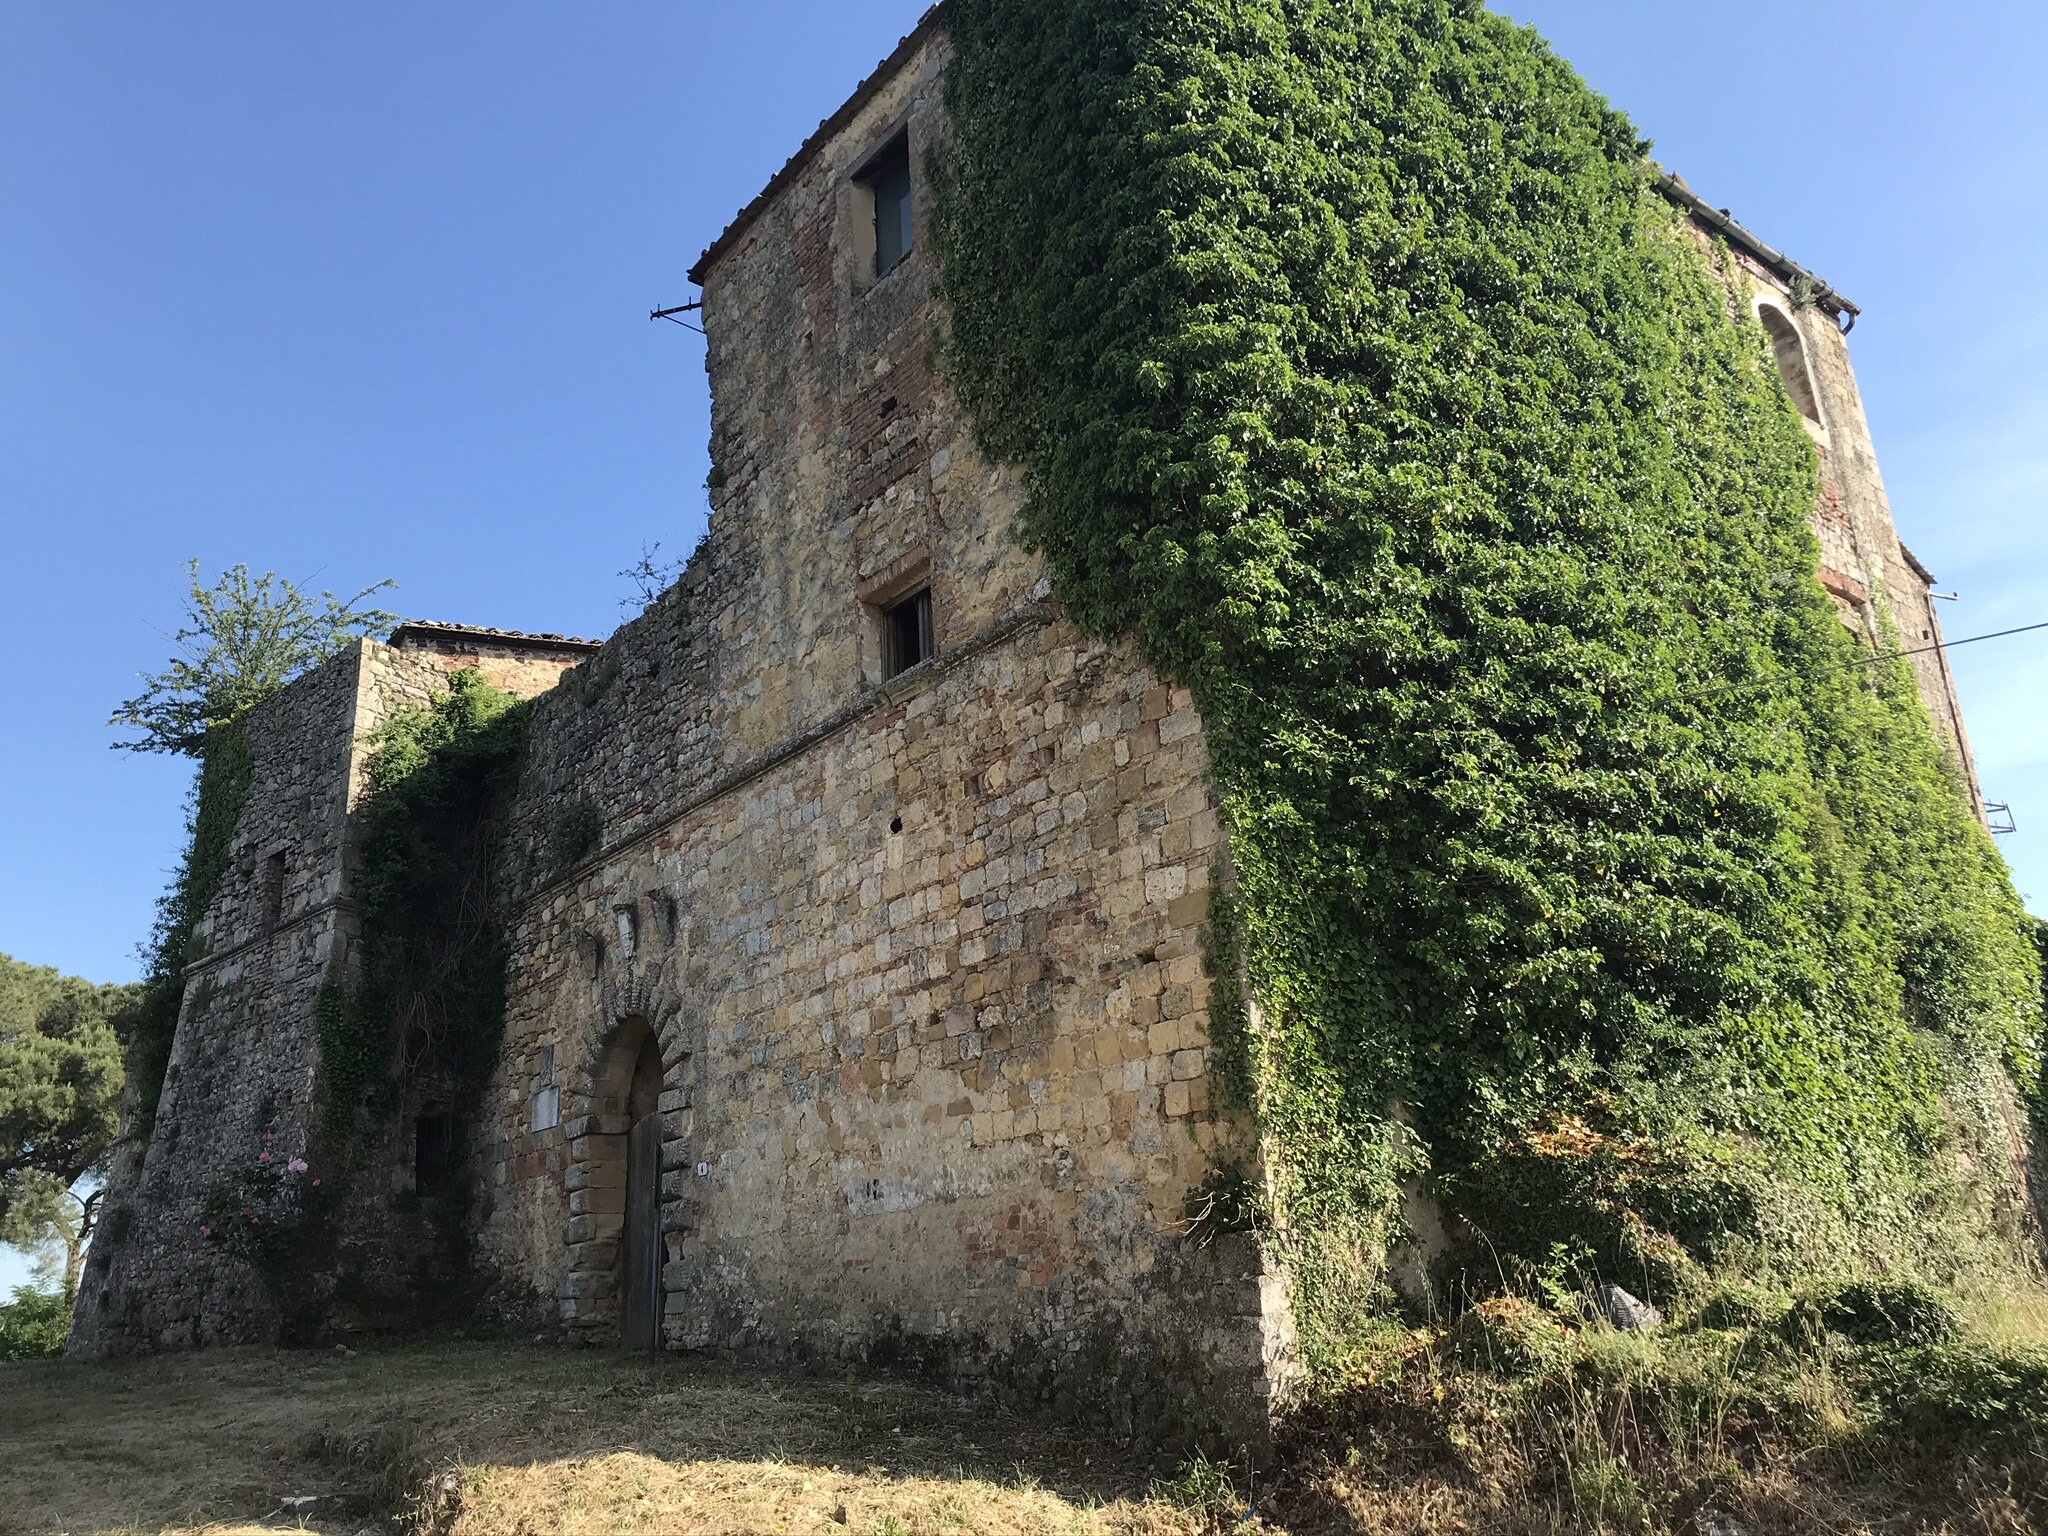  MONTERIGGIONI, Siena, Italy. June 3rd, 2021. PICTURED: A castle first built during the wars between Florence and Siena sits abandoned on a hillside. 